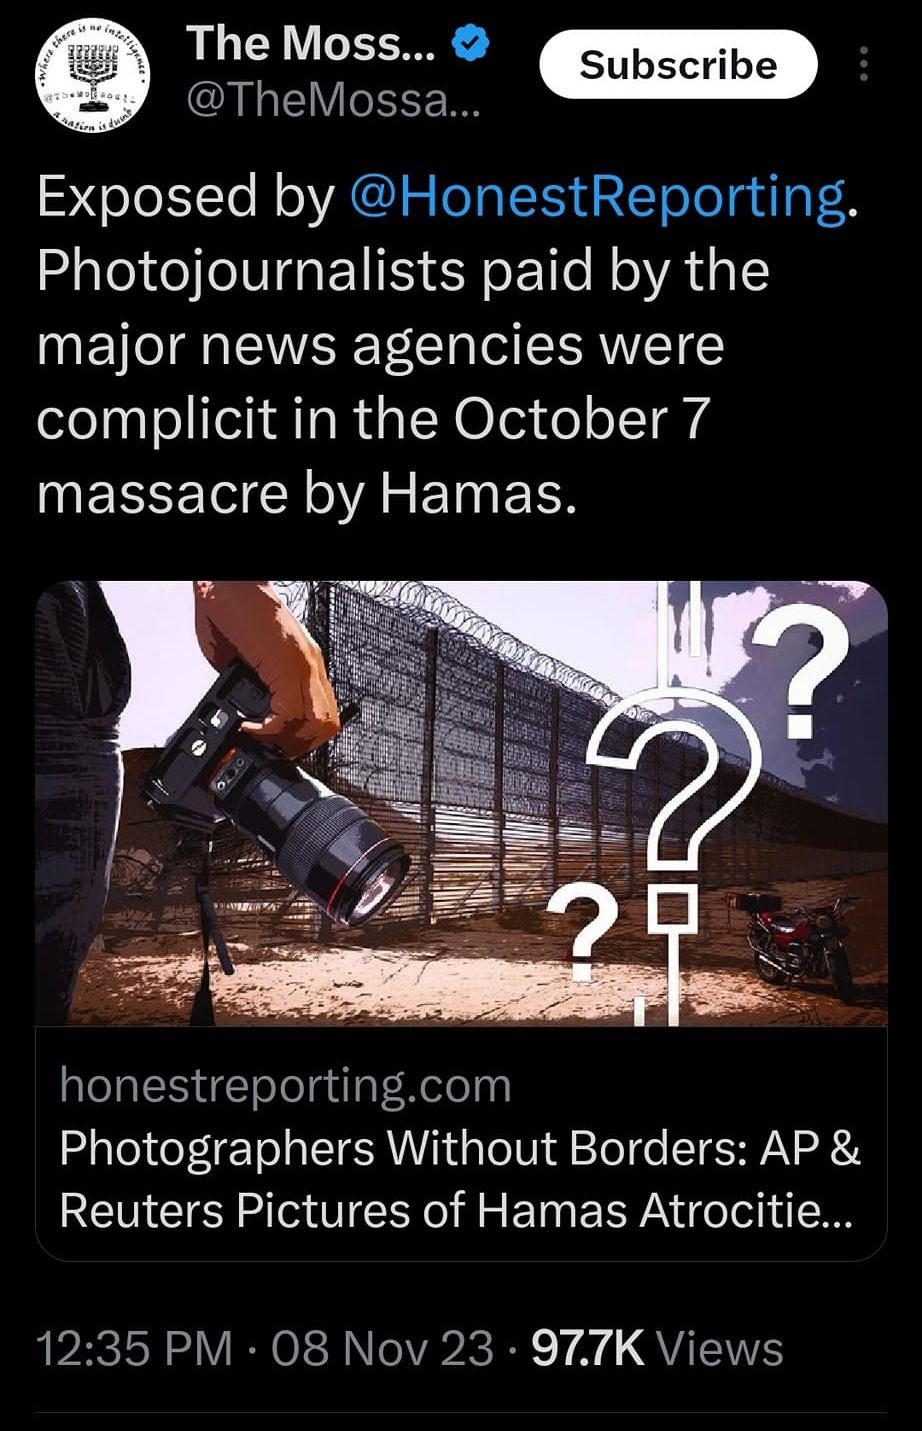 May be an image of 2 people and text that says '3:49 4G 100% Post Subscribe HonestReportingreposted The Moss... heMossa. Exposed by @HonestReporting. Photojournalists paid by the major news agencies were complicit in the October massacre by Hamas. honestreporting.com Photographers Without Borders: AP Reuters Pictures of Hamas Atrocitie... 12:35 PM 08 Nov 97.7K ews Post'